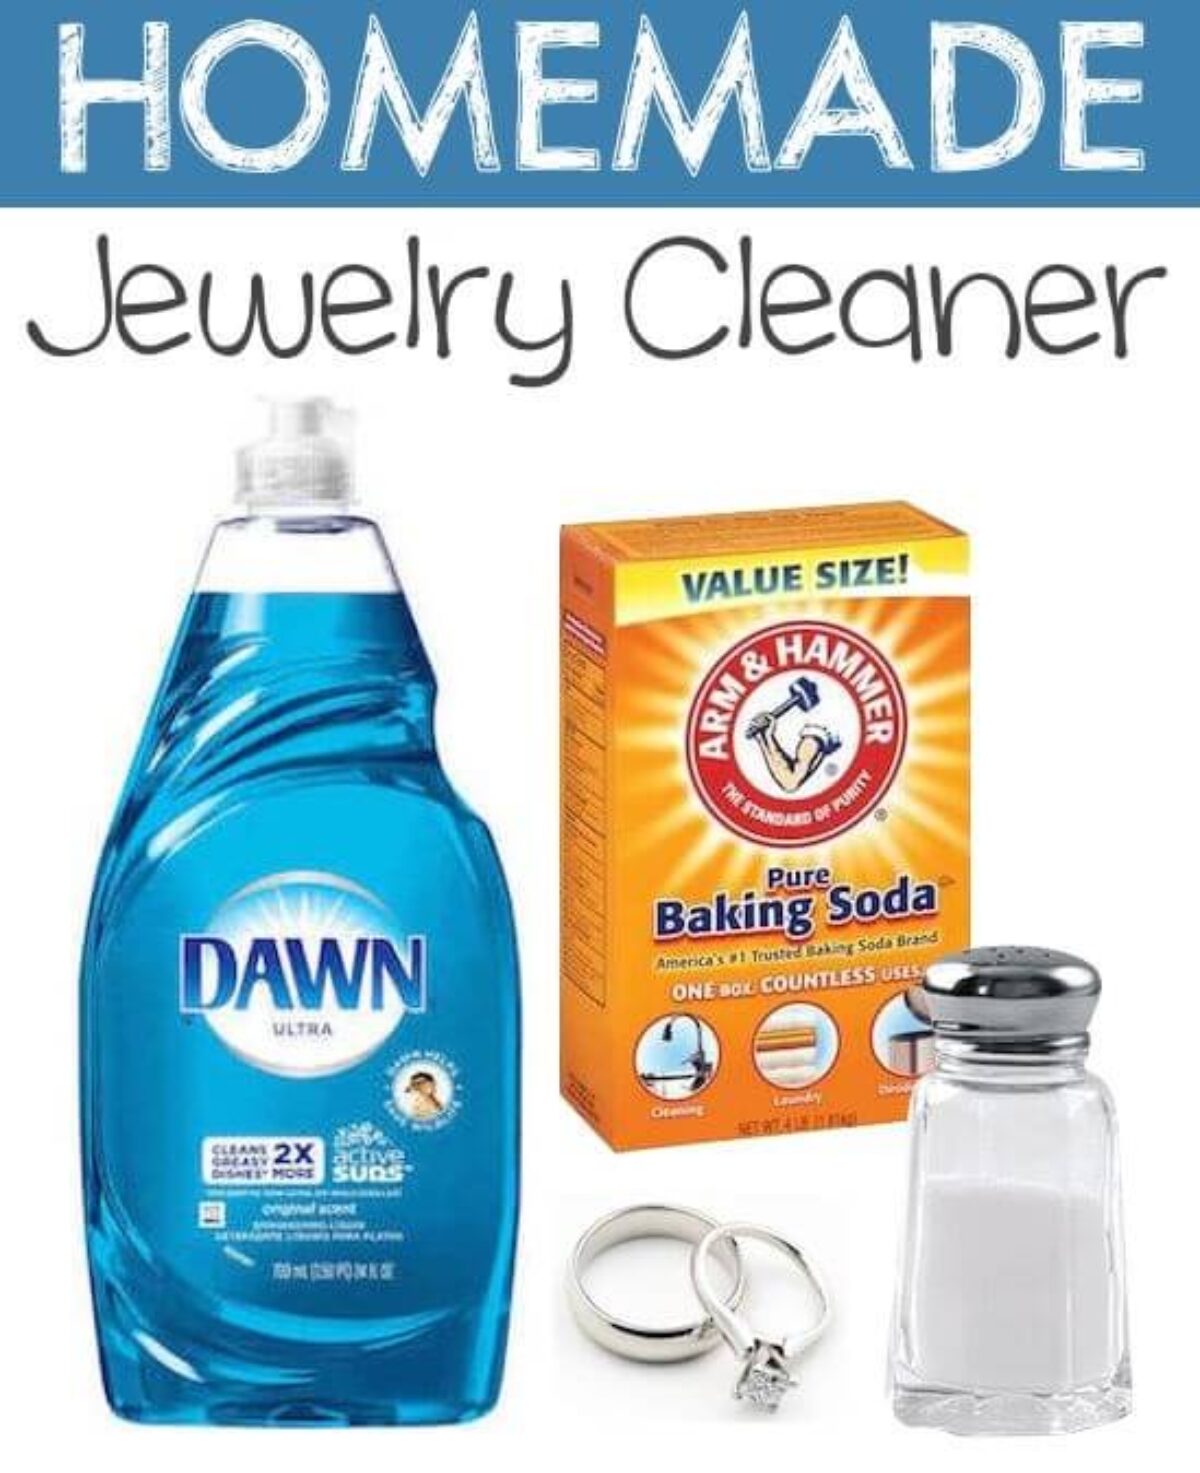 How To Make Jewelry Cleaner With These Simple Homemade Recipes